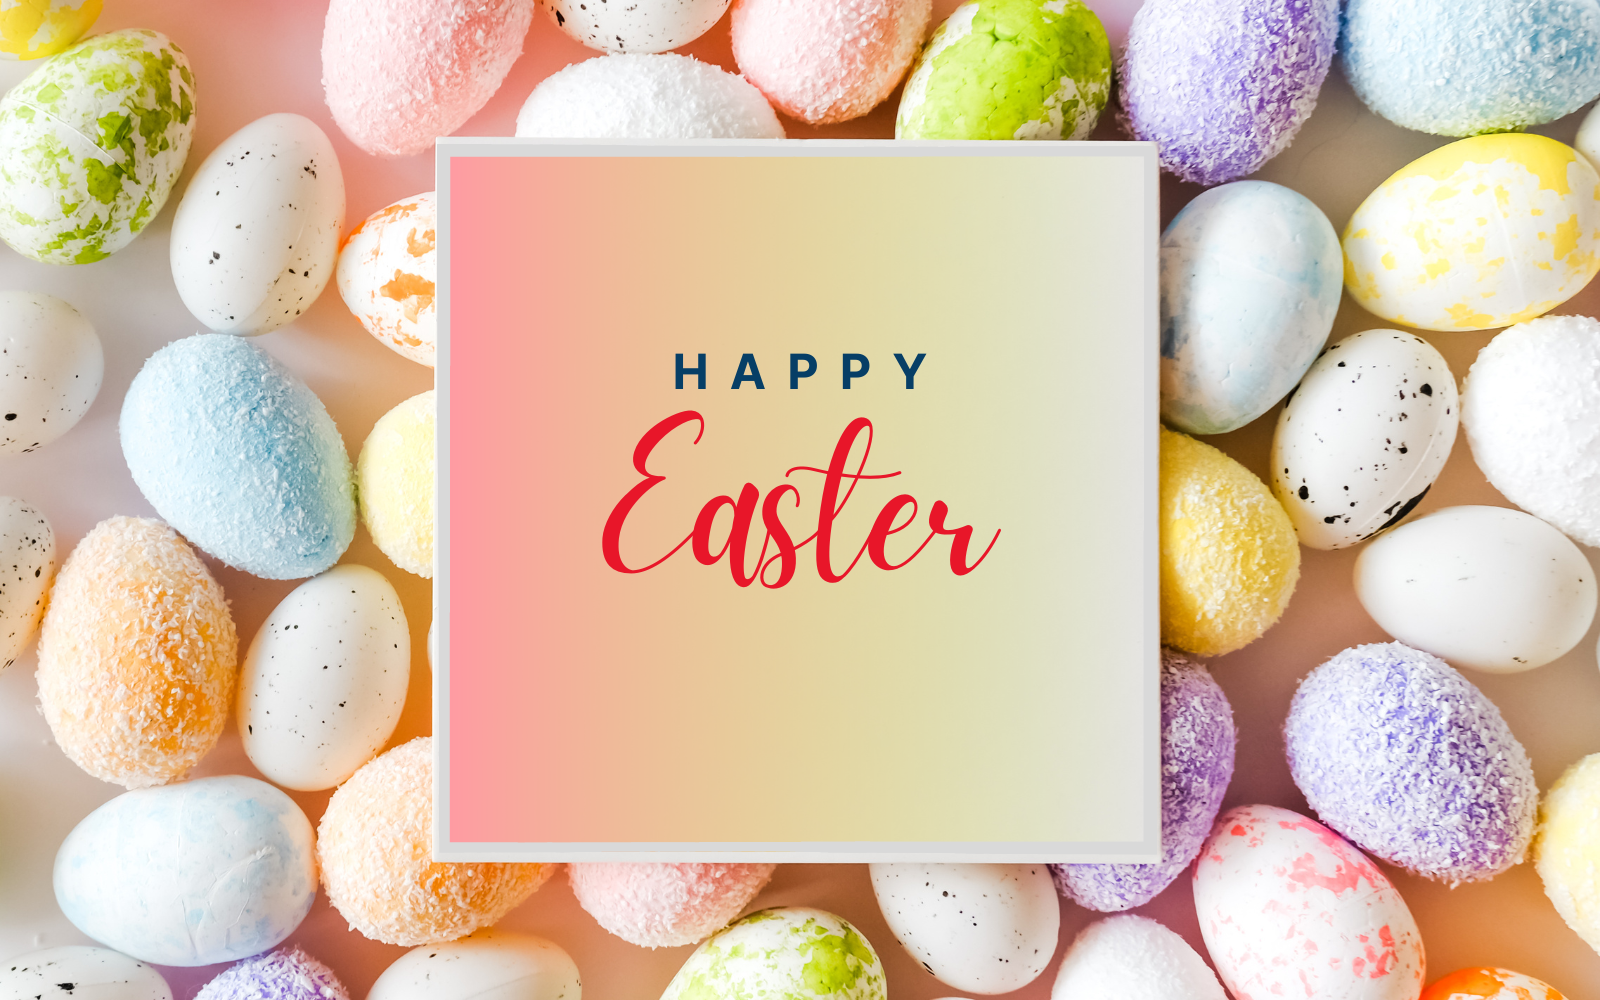 HAPPY EASTER FROM TROIKA CANADA